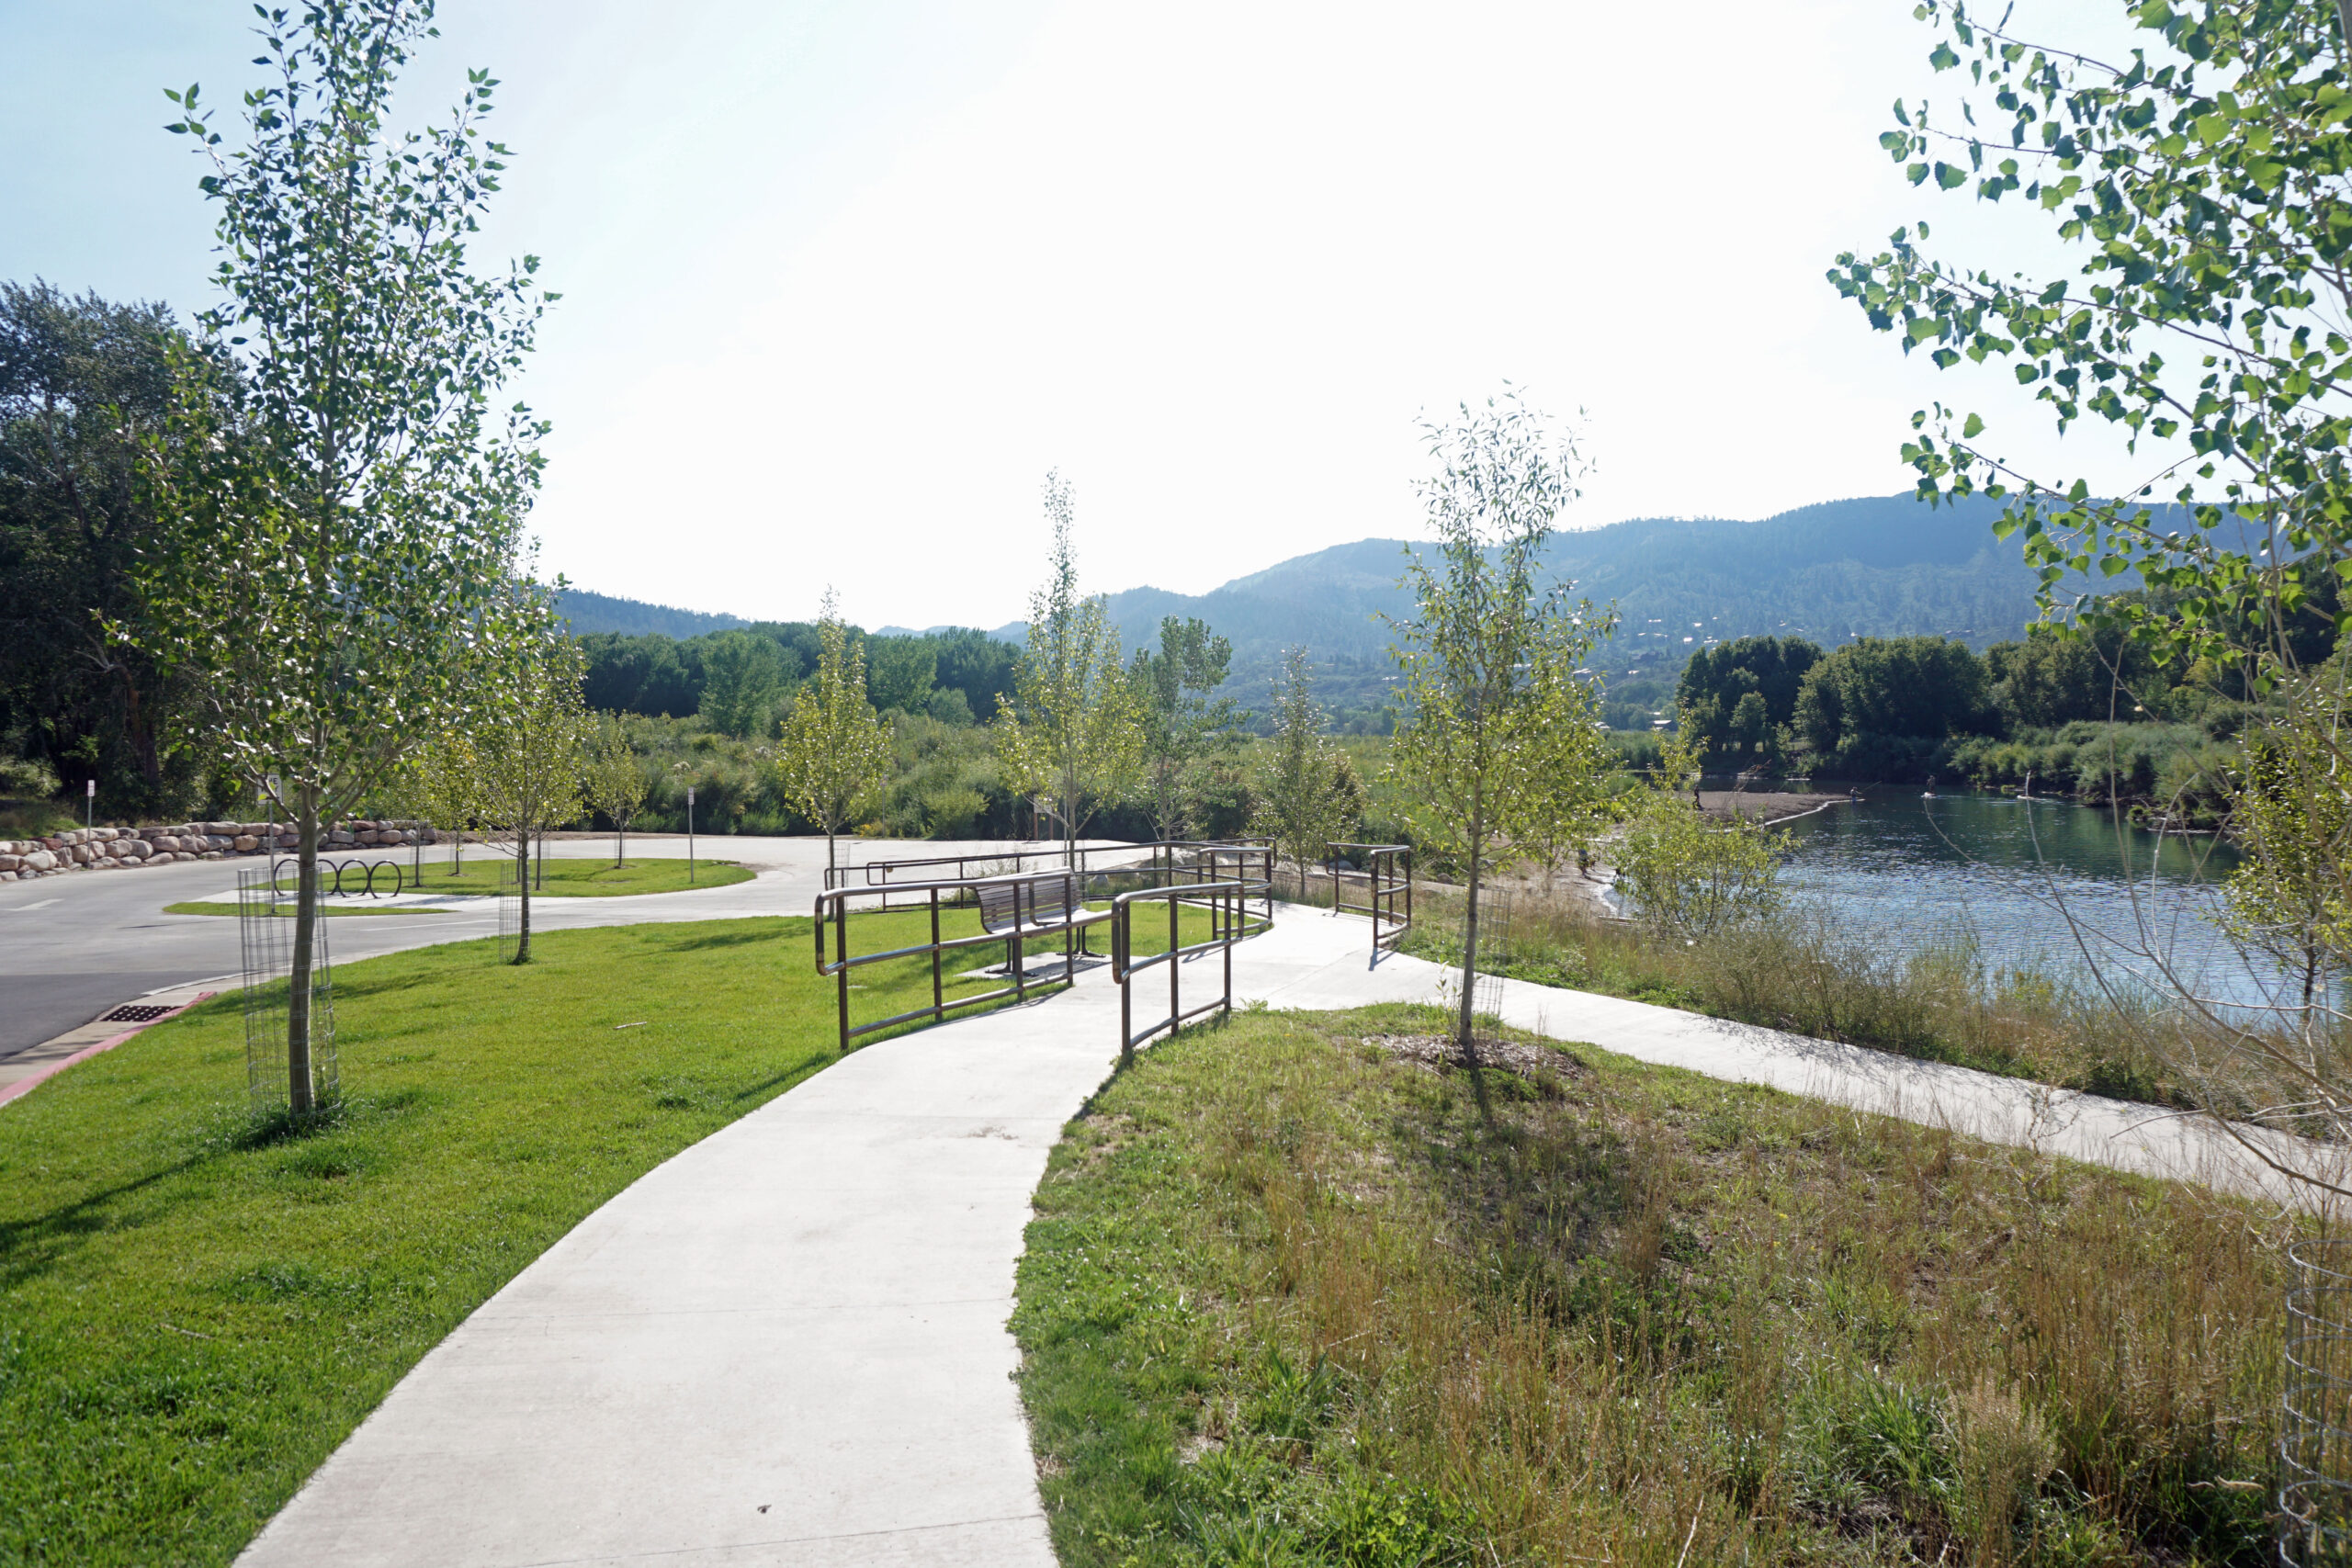 Oxbow Park and boat ramp